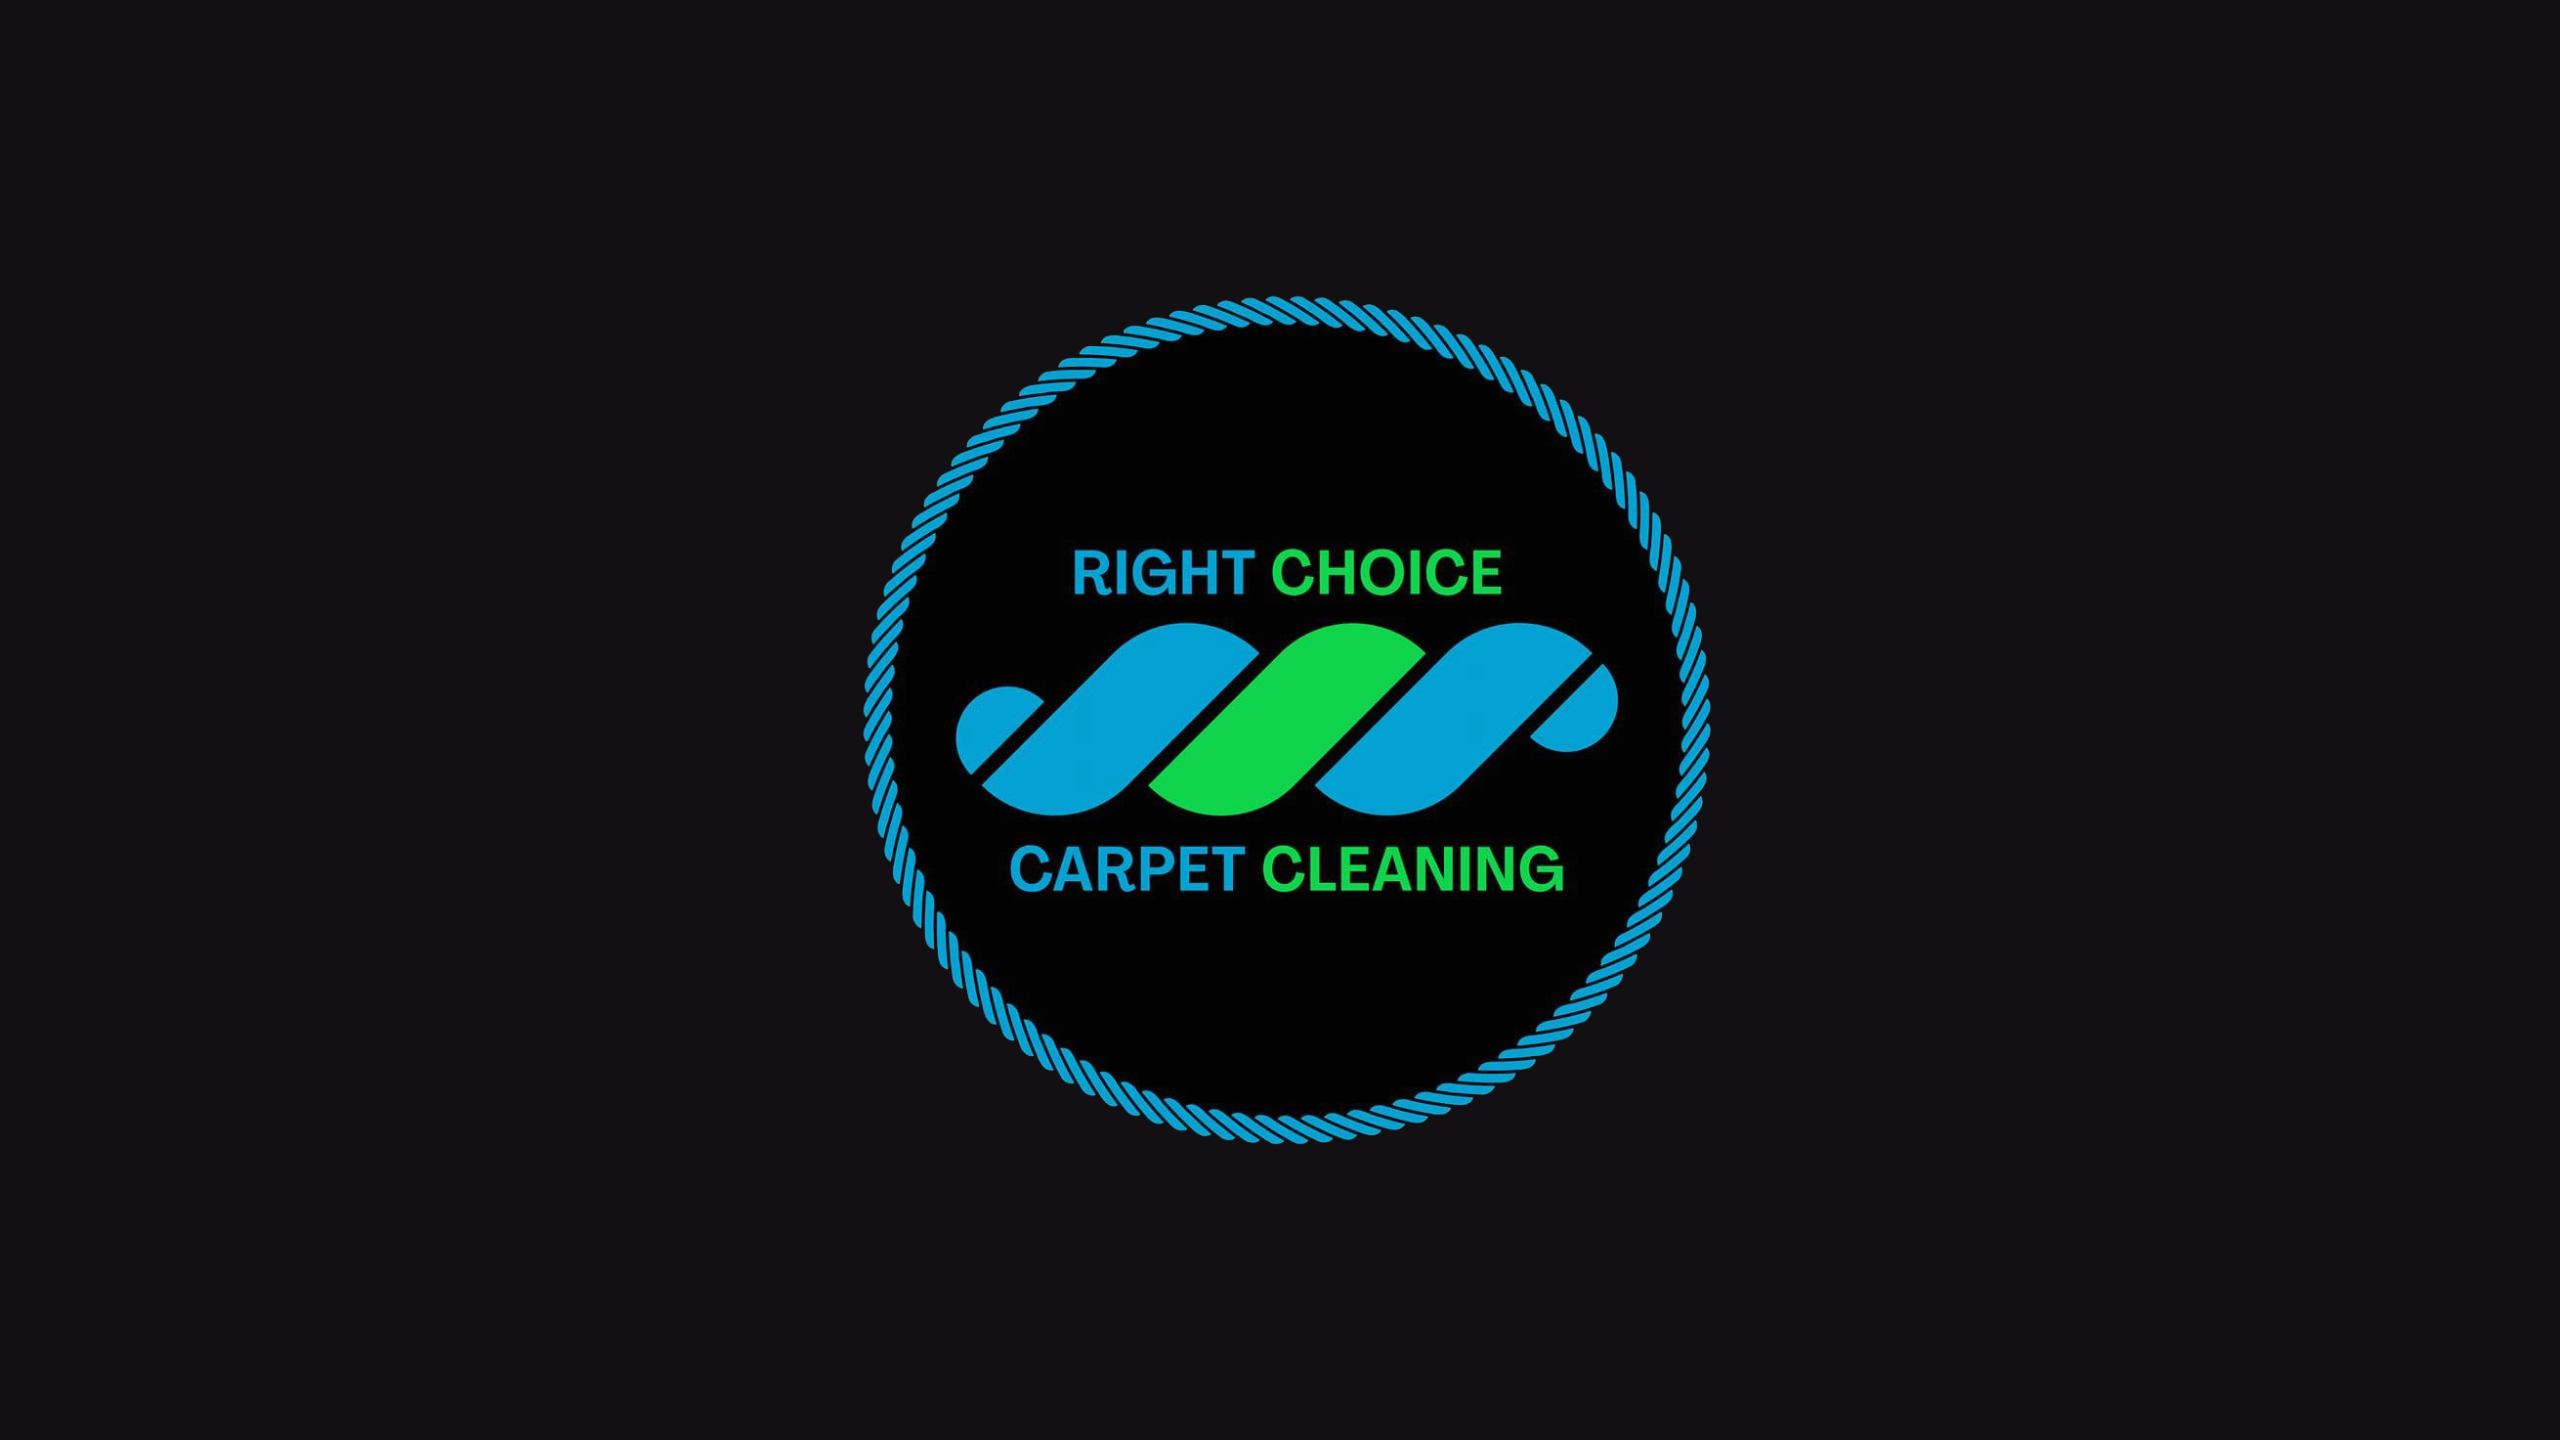 Right-Choice-Carpet-Cleaning-logo.png